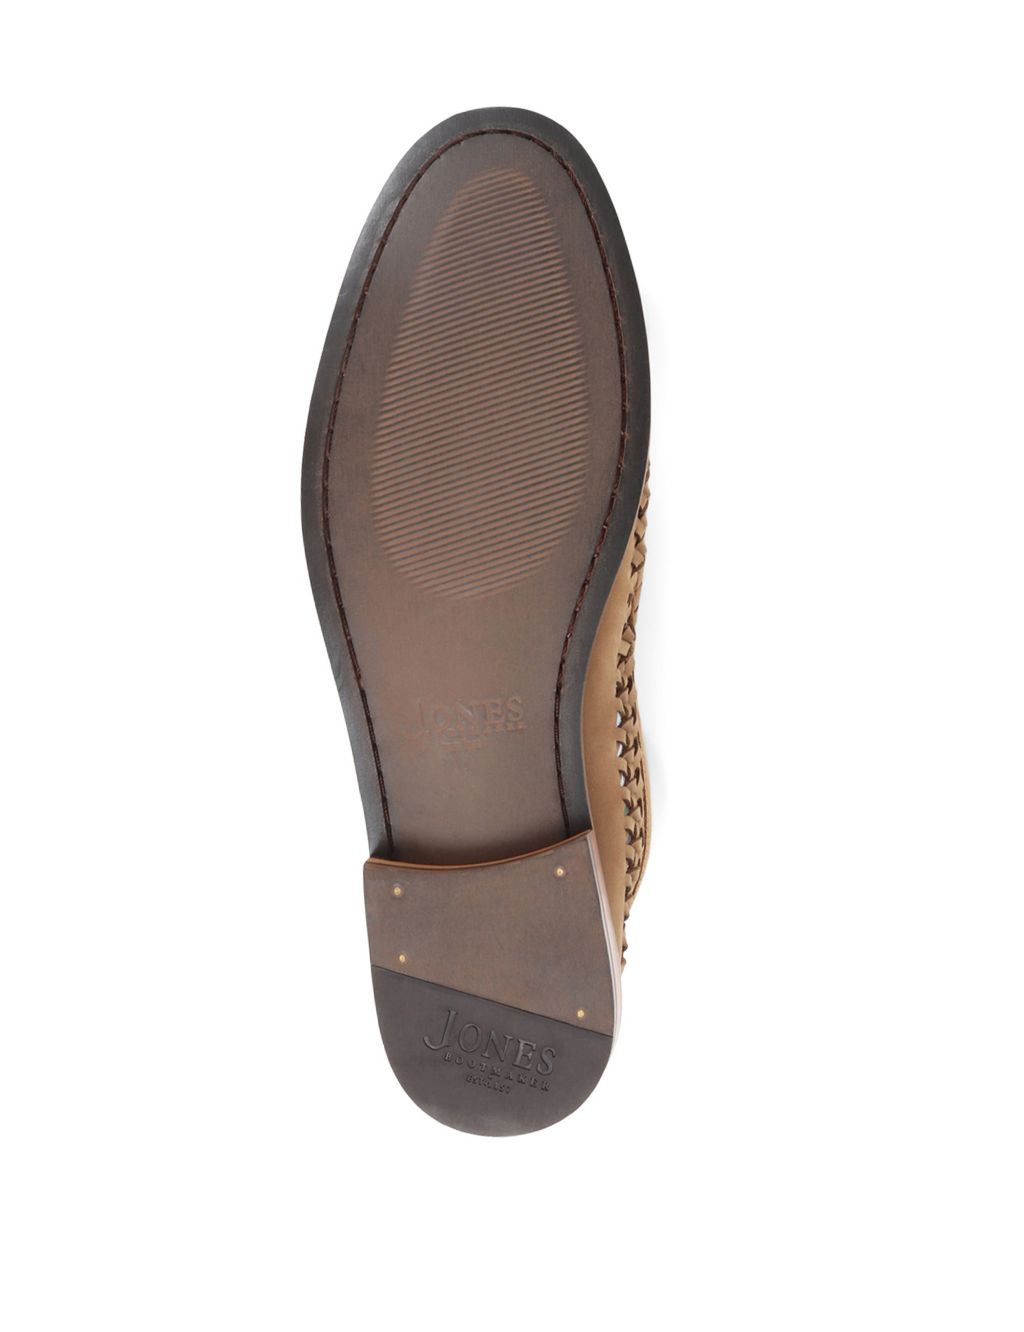 Leather Slip-On Loafers image 6